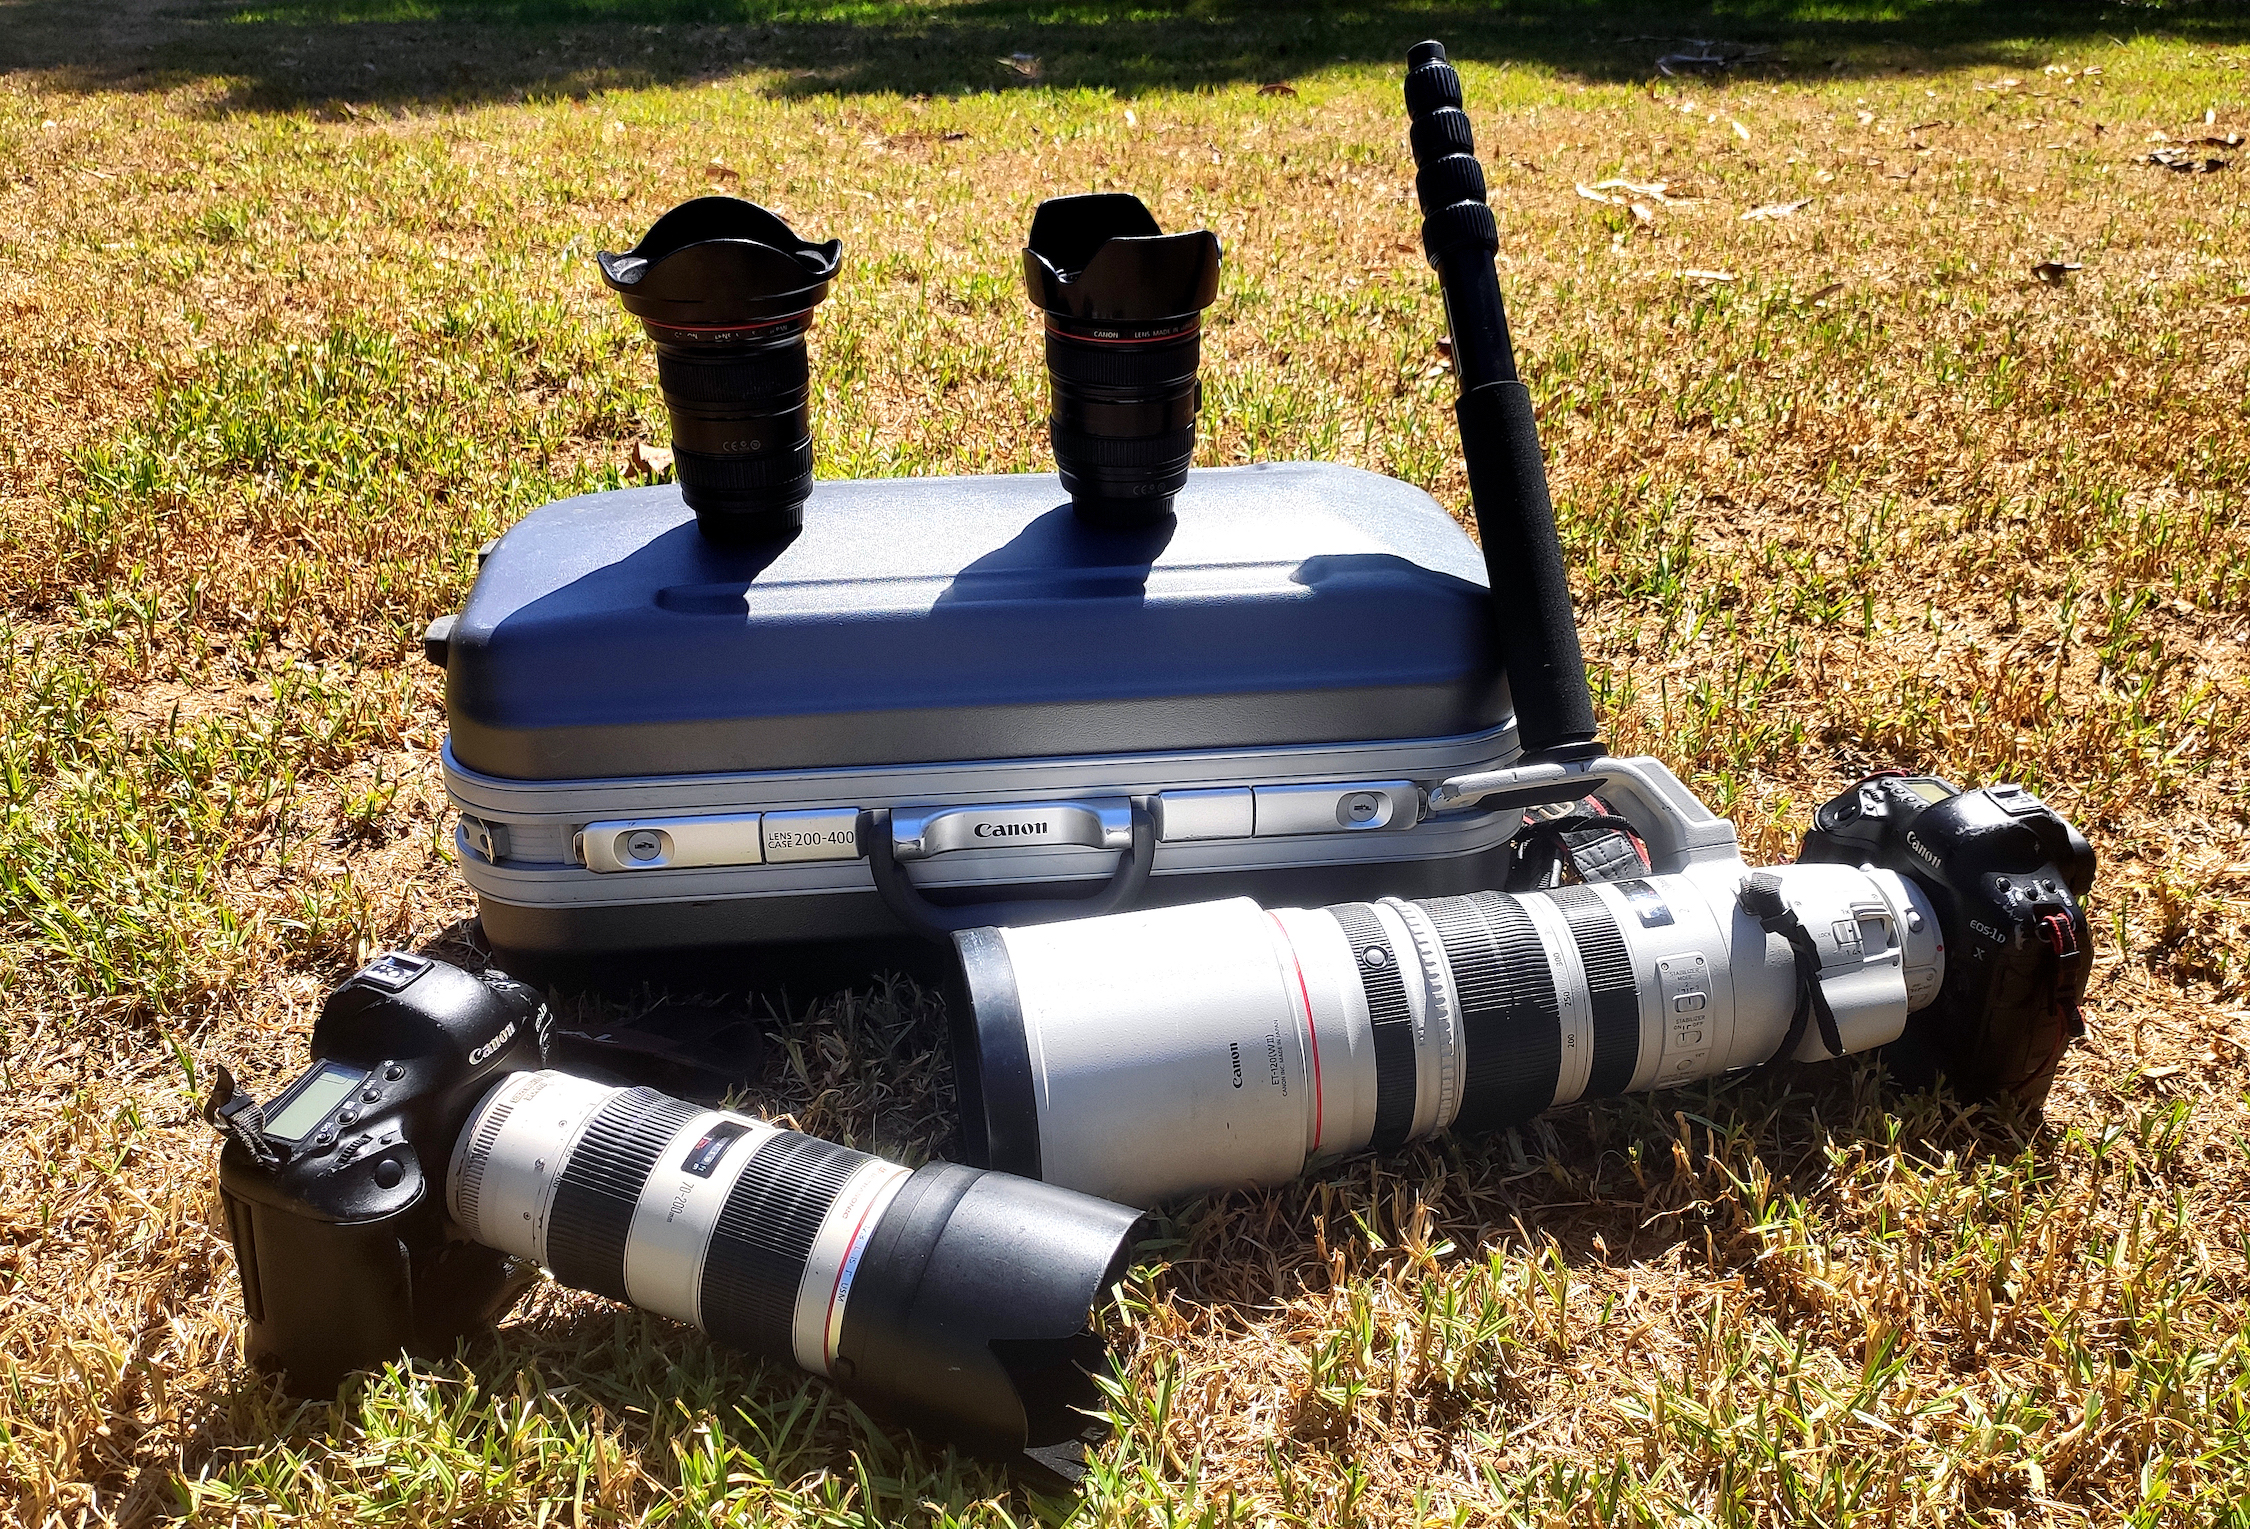 A camera kit on a hard case with two Canon bodies and four lenses